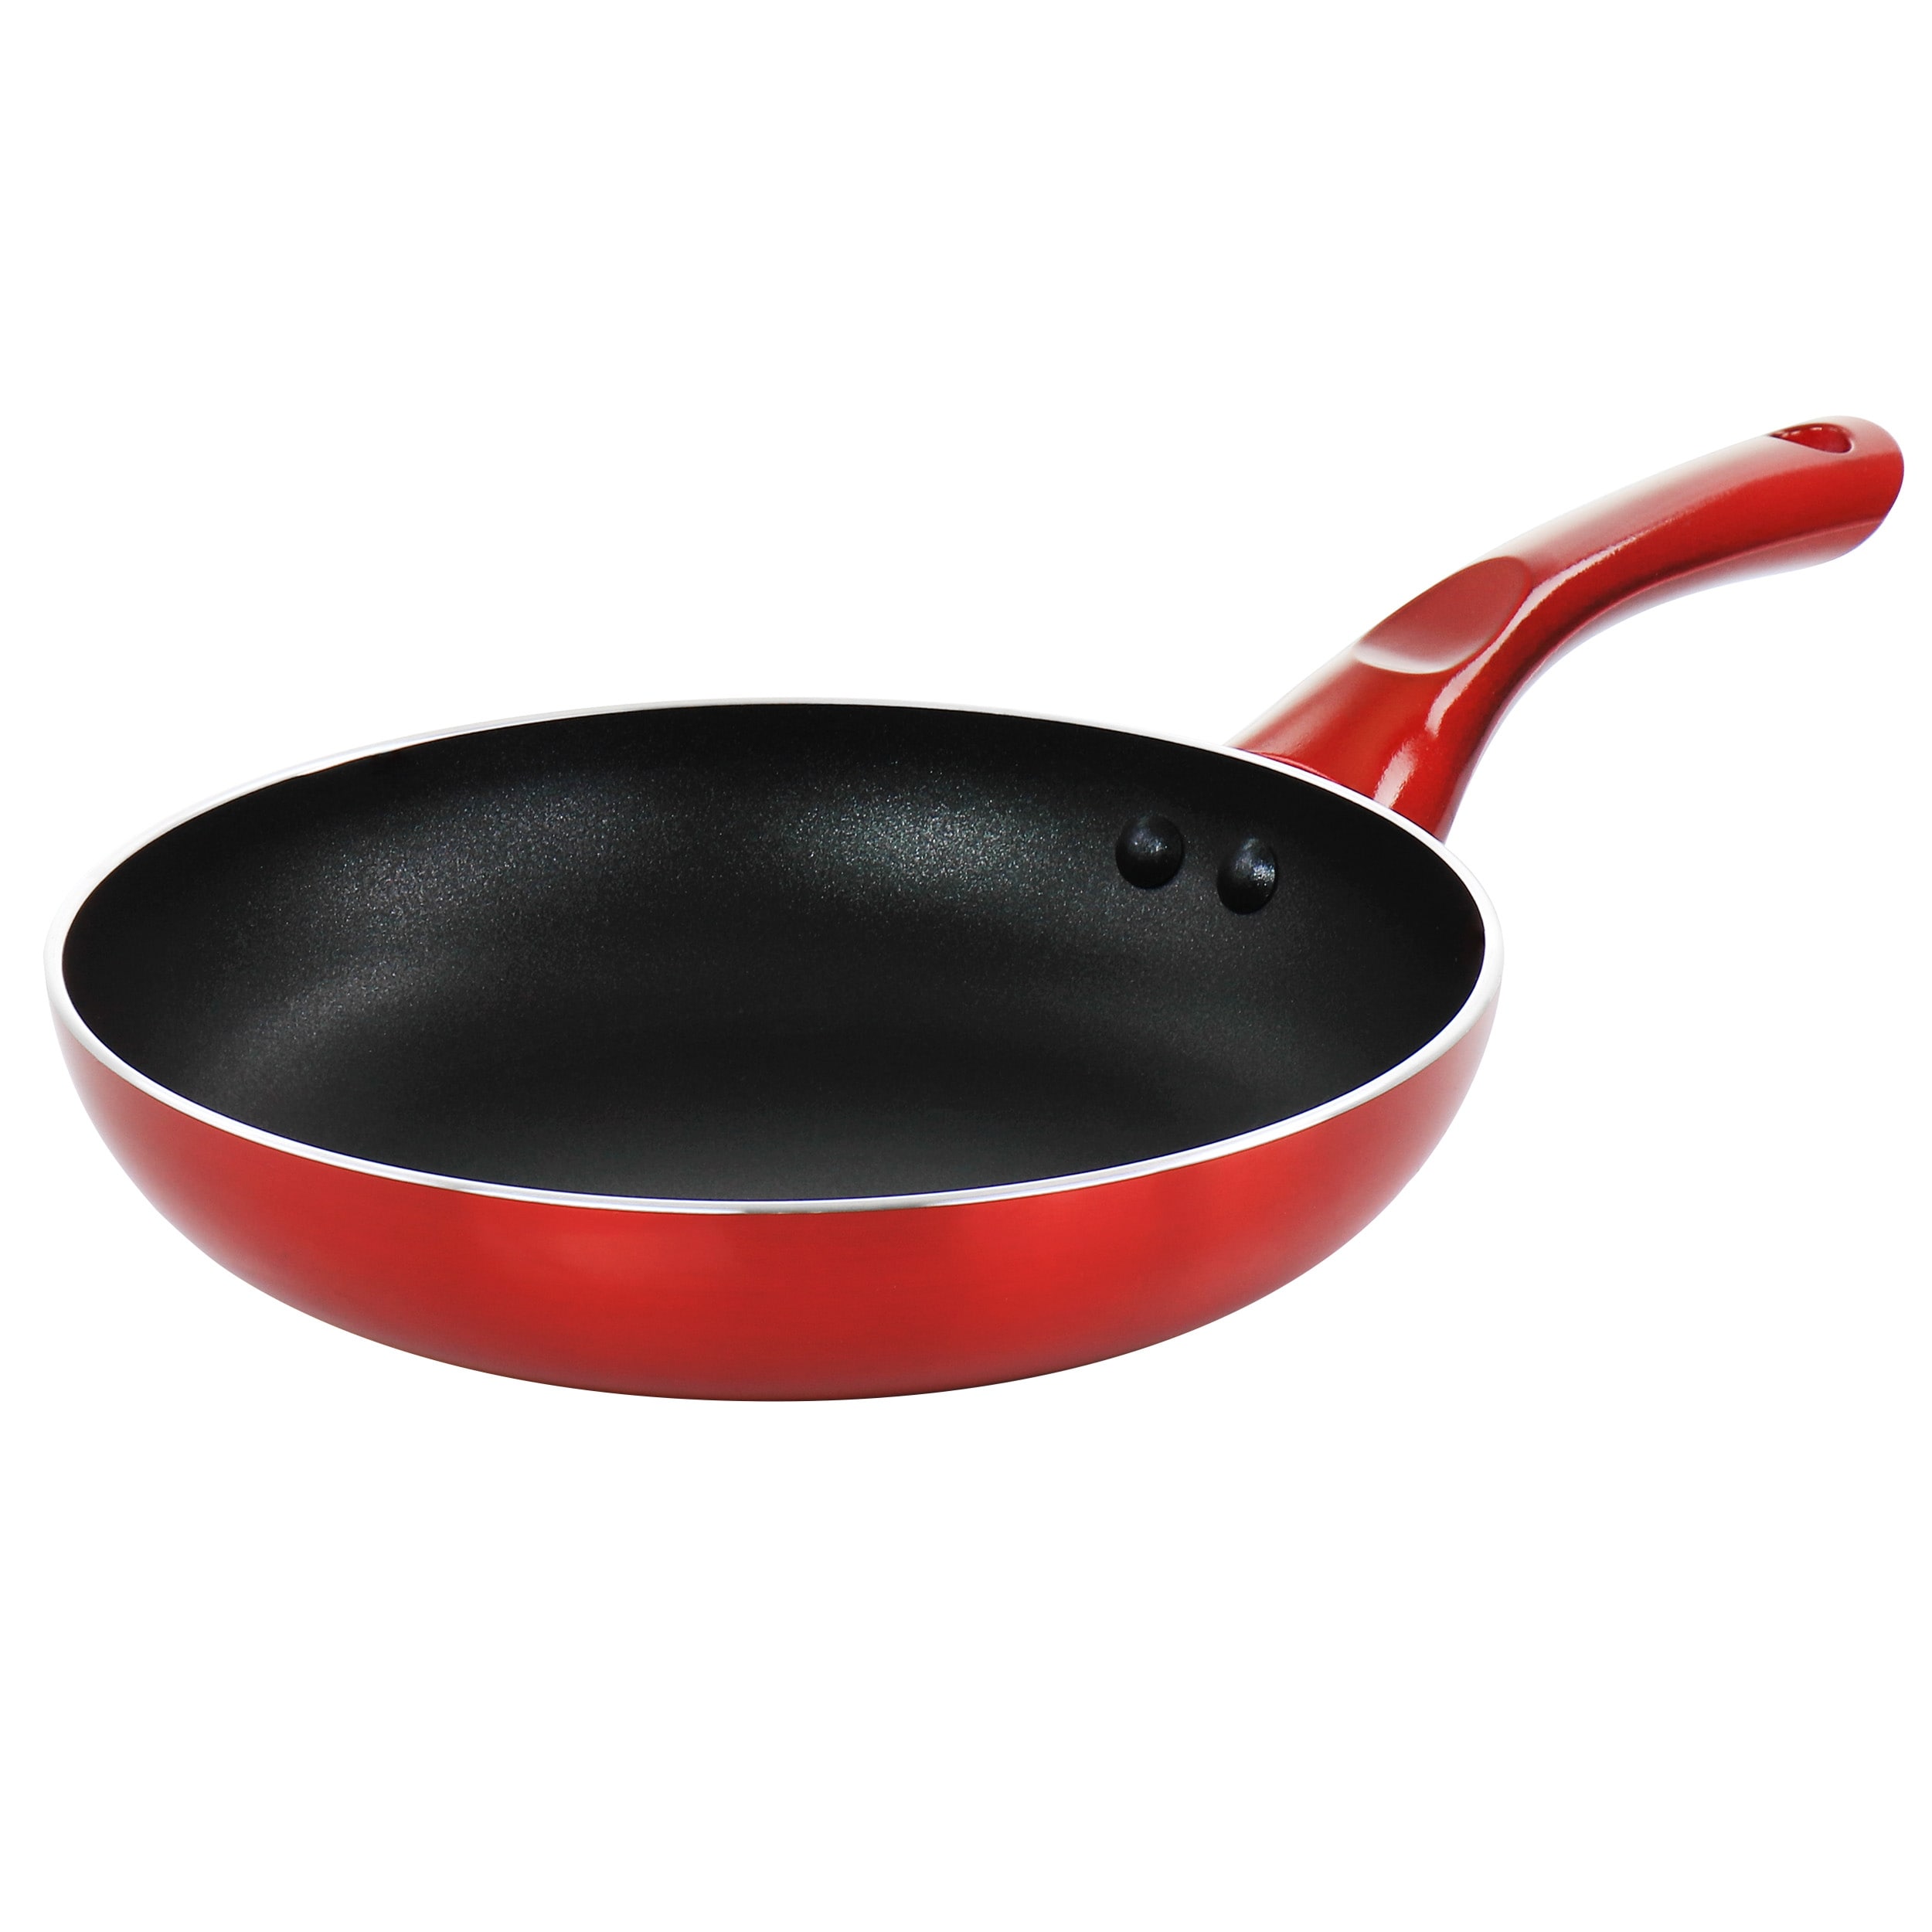 Better Chef 12 Silver Metallic Non-Stick Gourmet Fry Pan - Red - 20587750